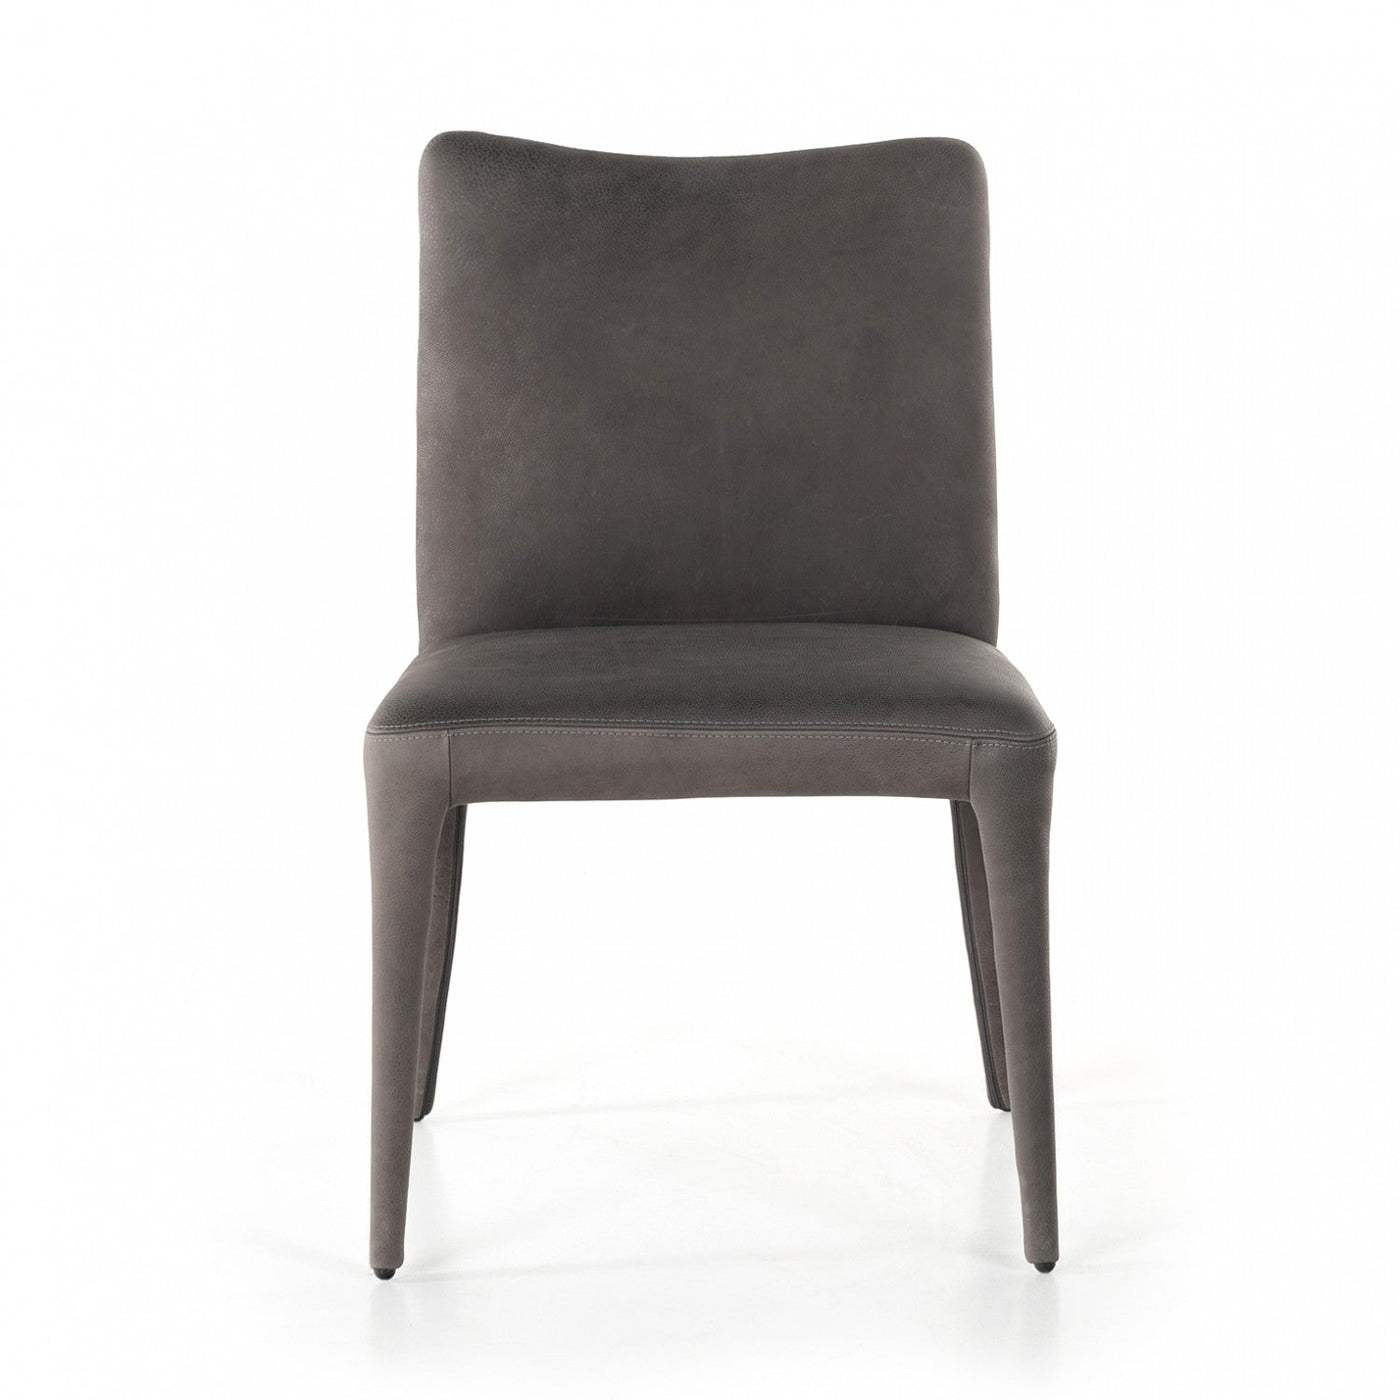 MONZA DINING CHAIR,HERITAGE GRAPHITE